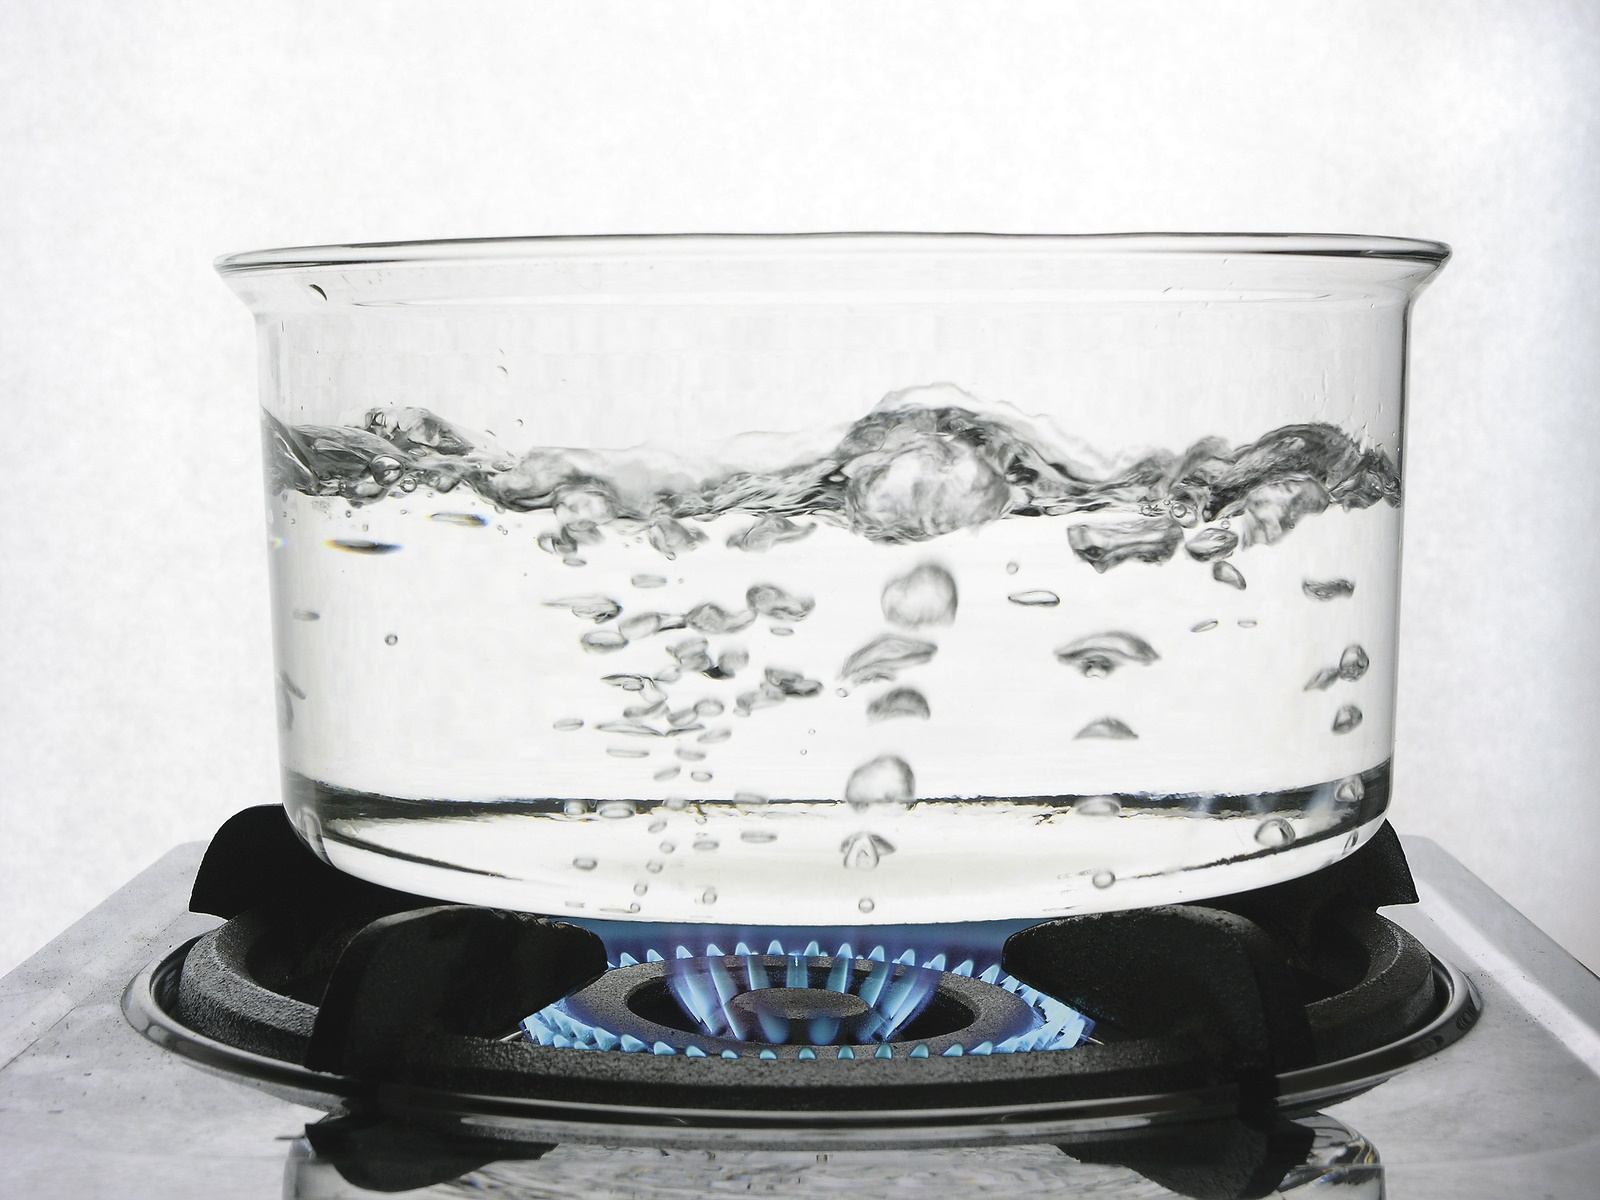 Water boiling in glass pan